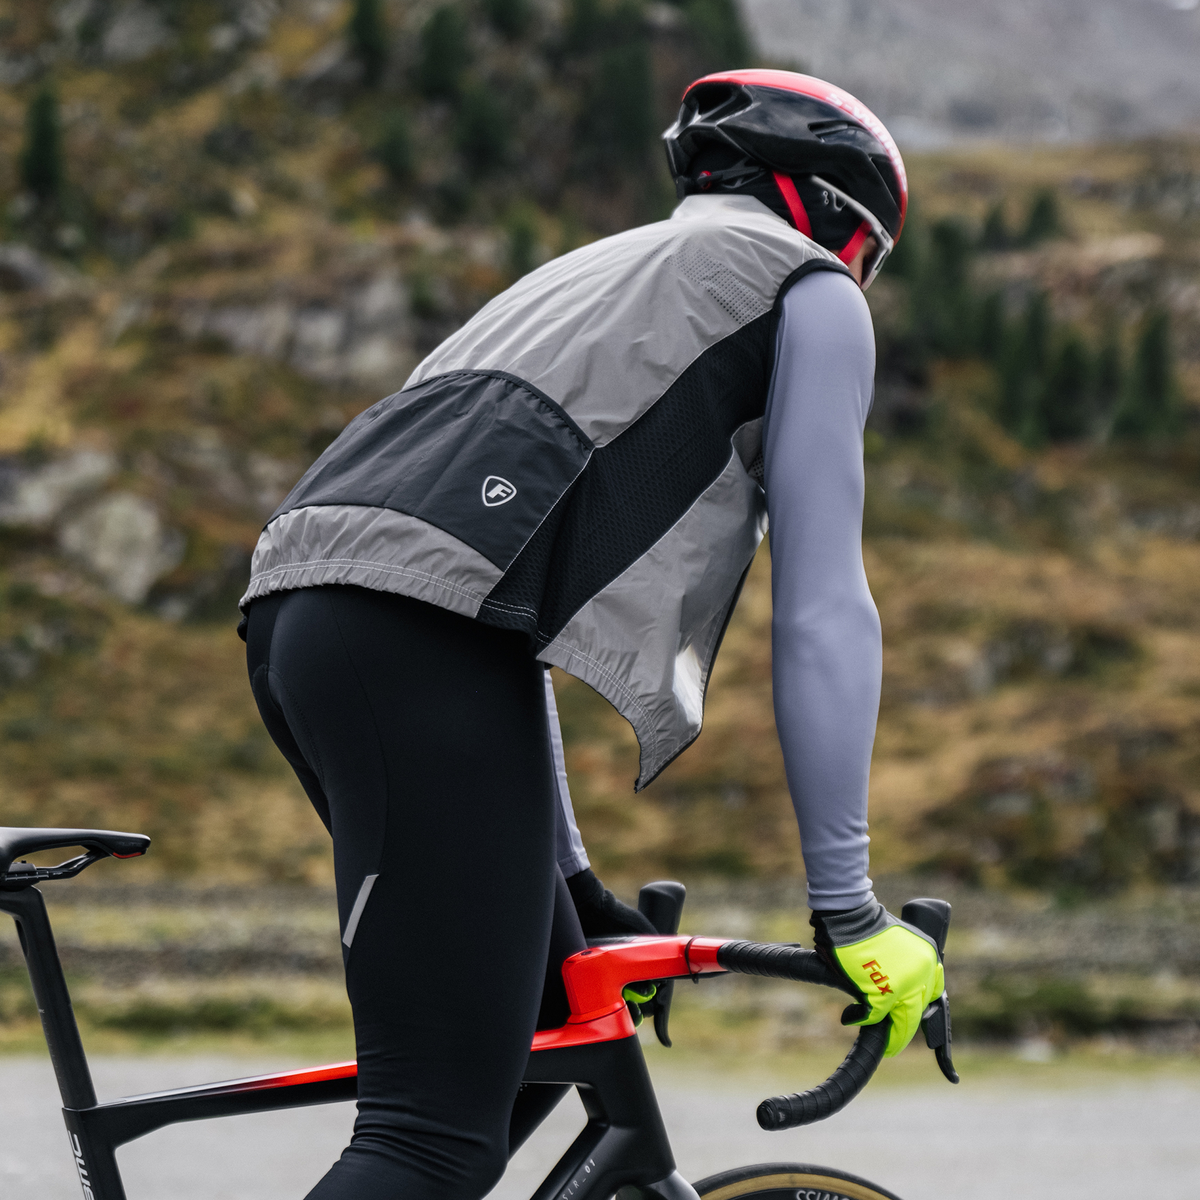 Men's Winter Cycling Tights, Wind & Water-Resistant